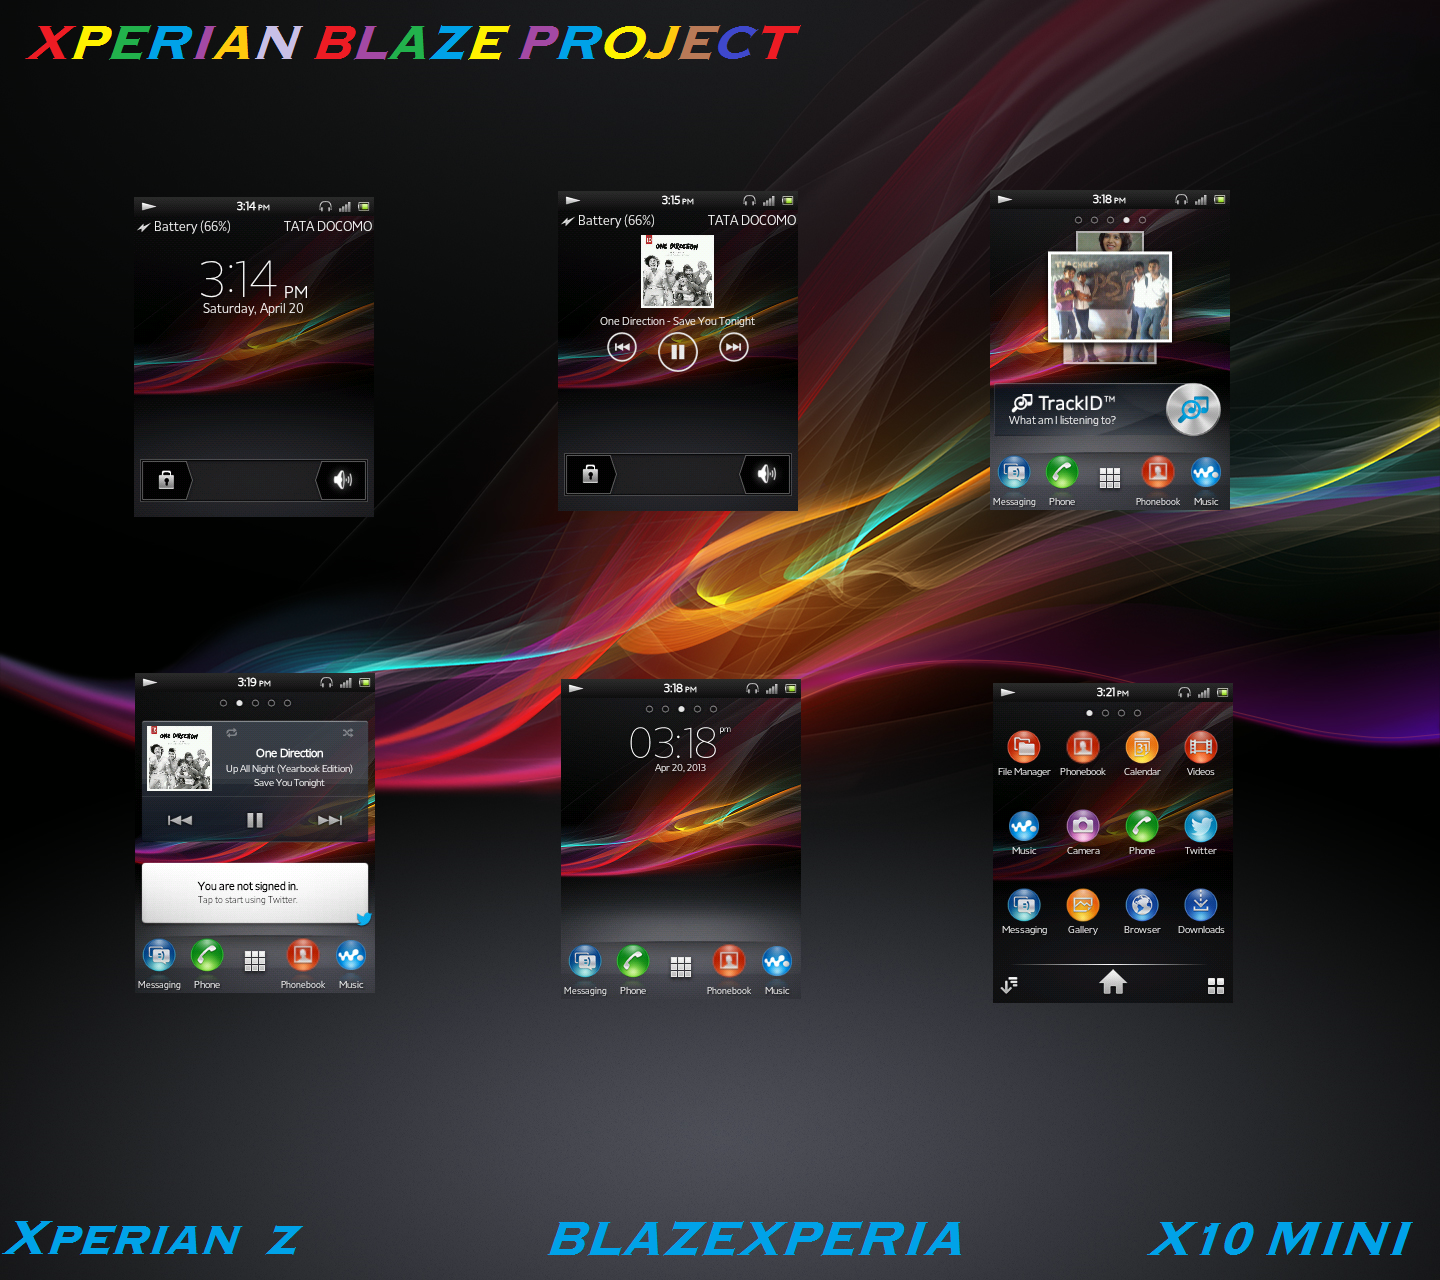 ... xperia z styled icons 2 xperia transitions 3 xperia s